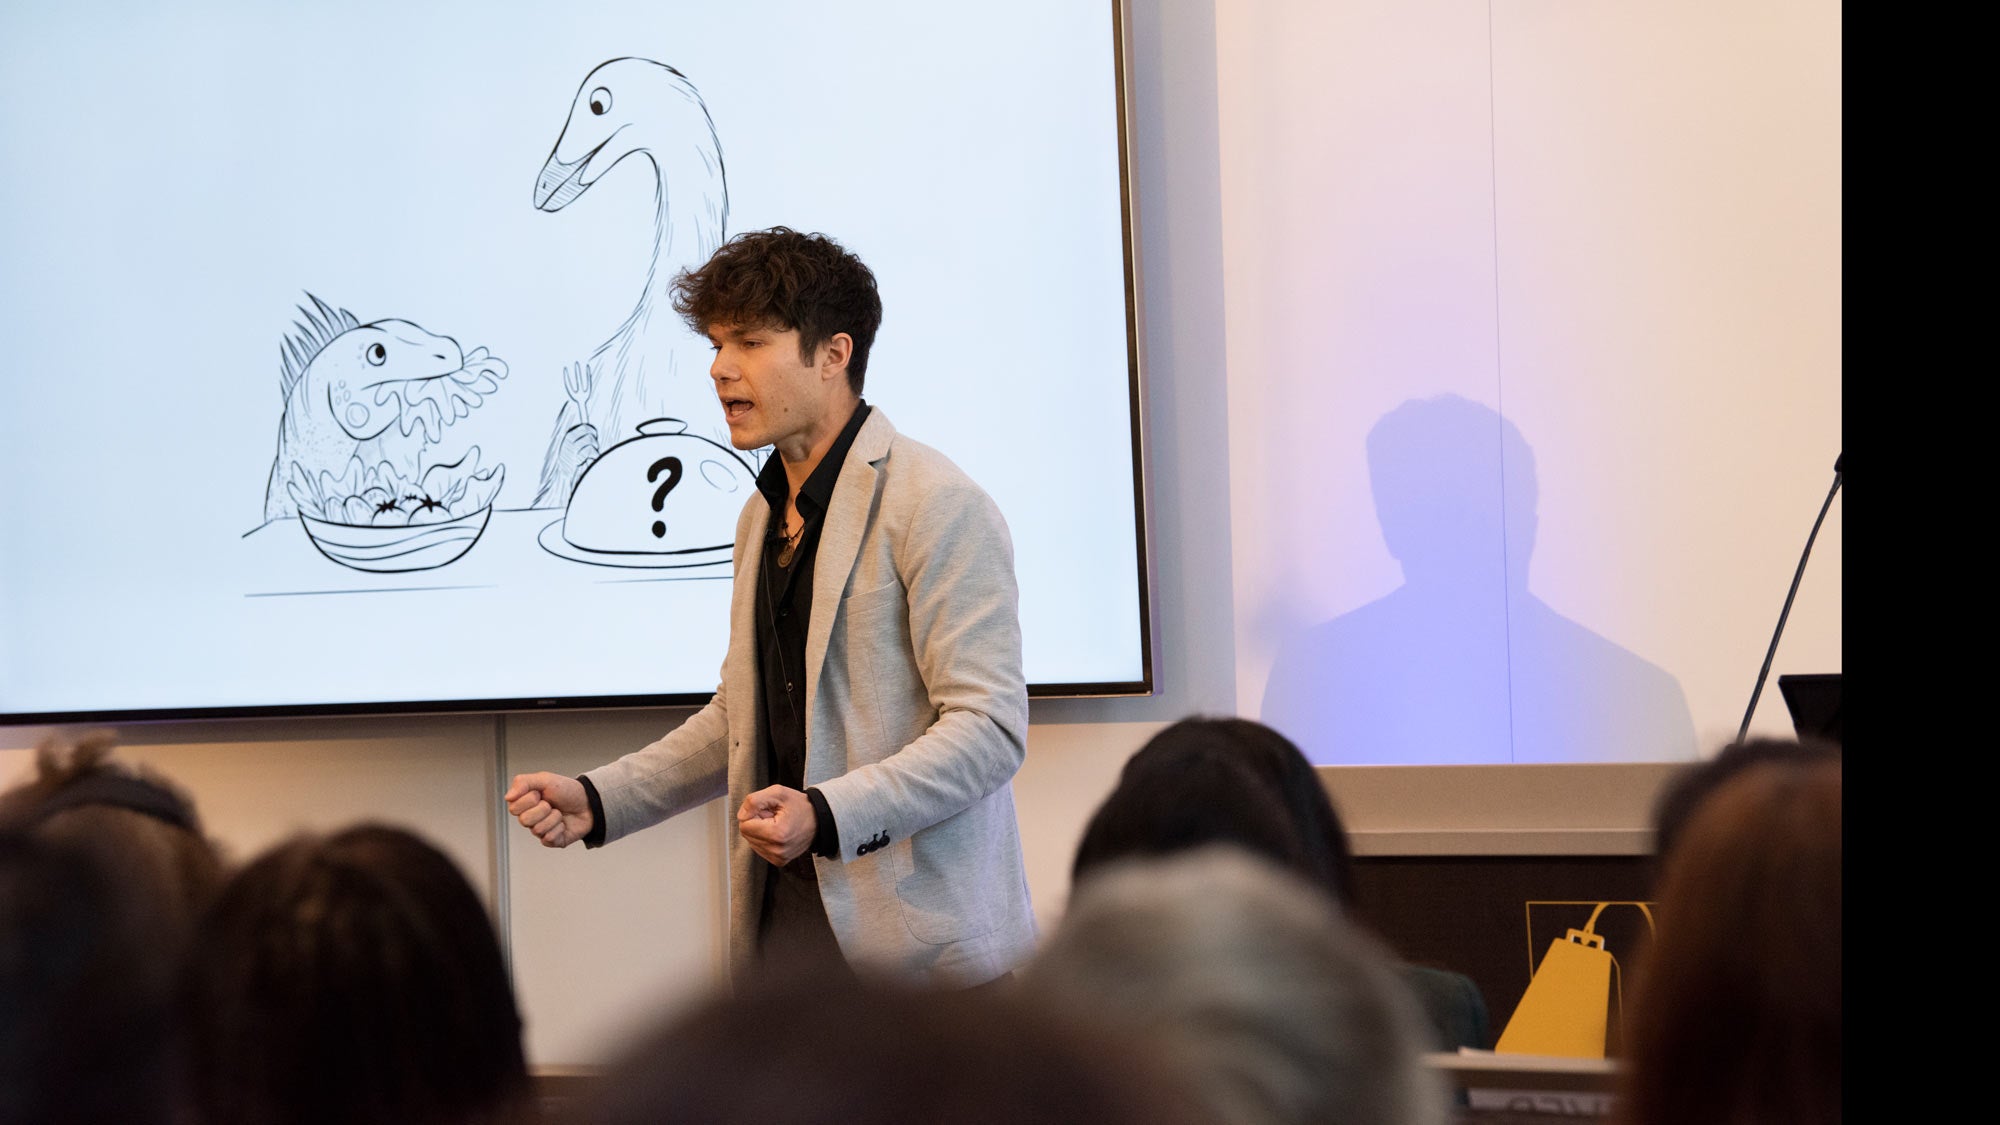 Man gestures during presentation, with drawing of reptiles behind him, on a slide